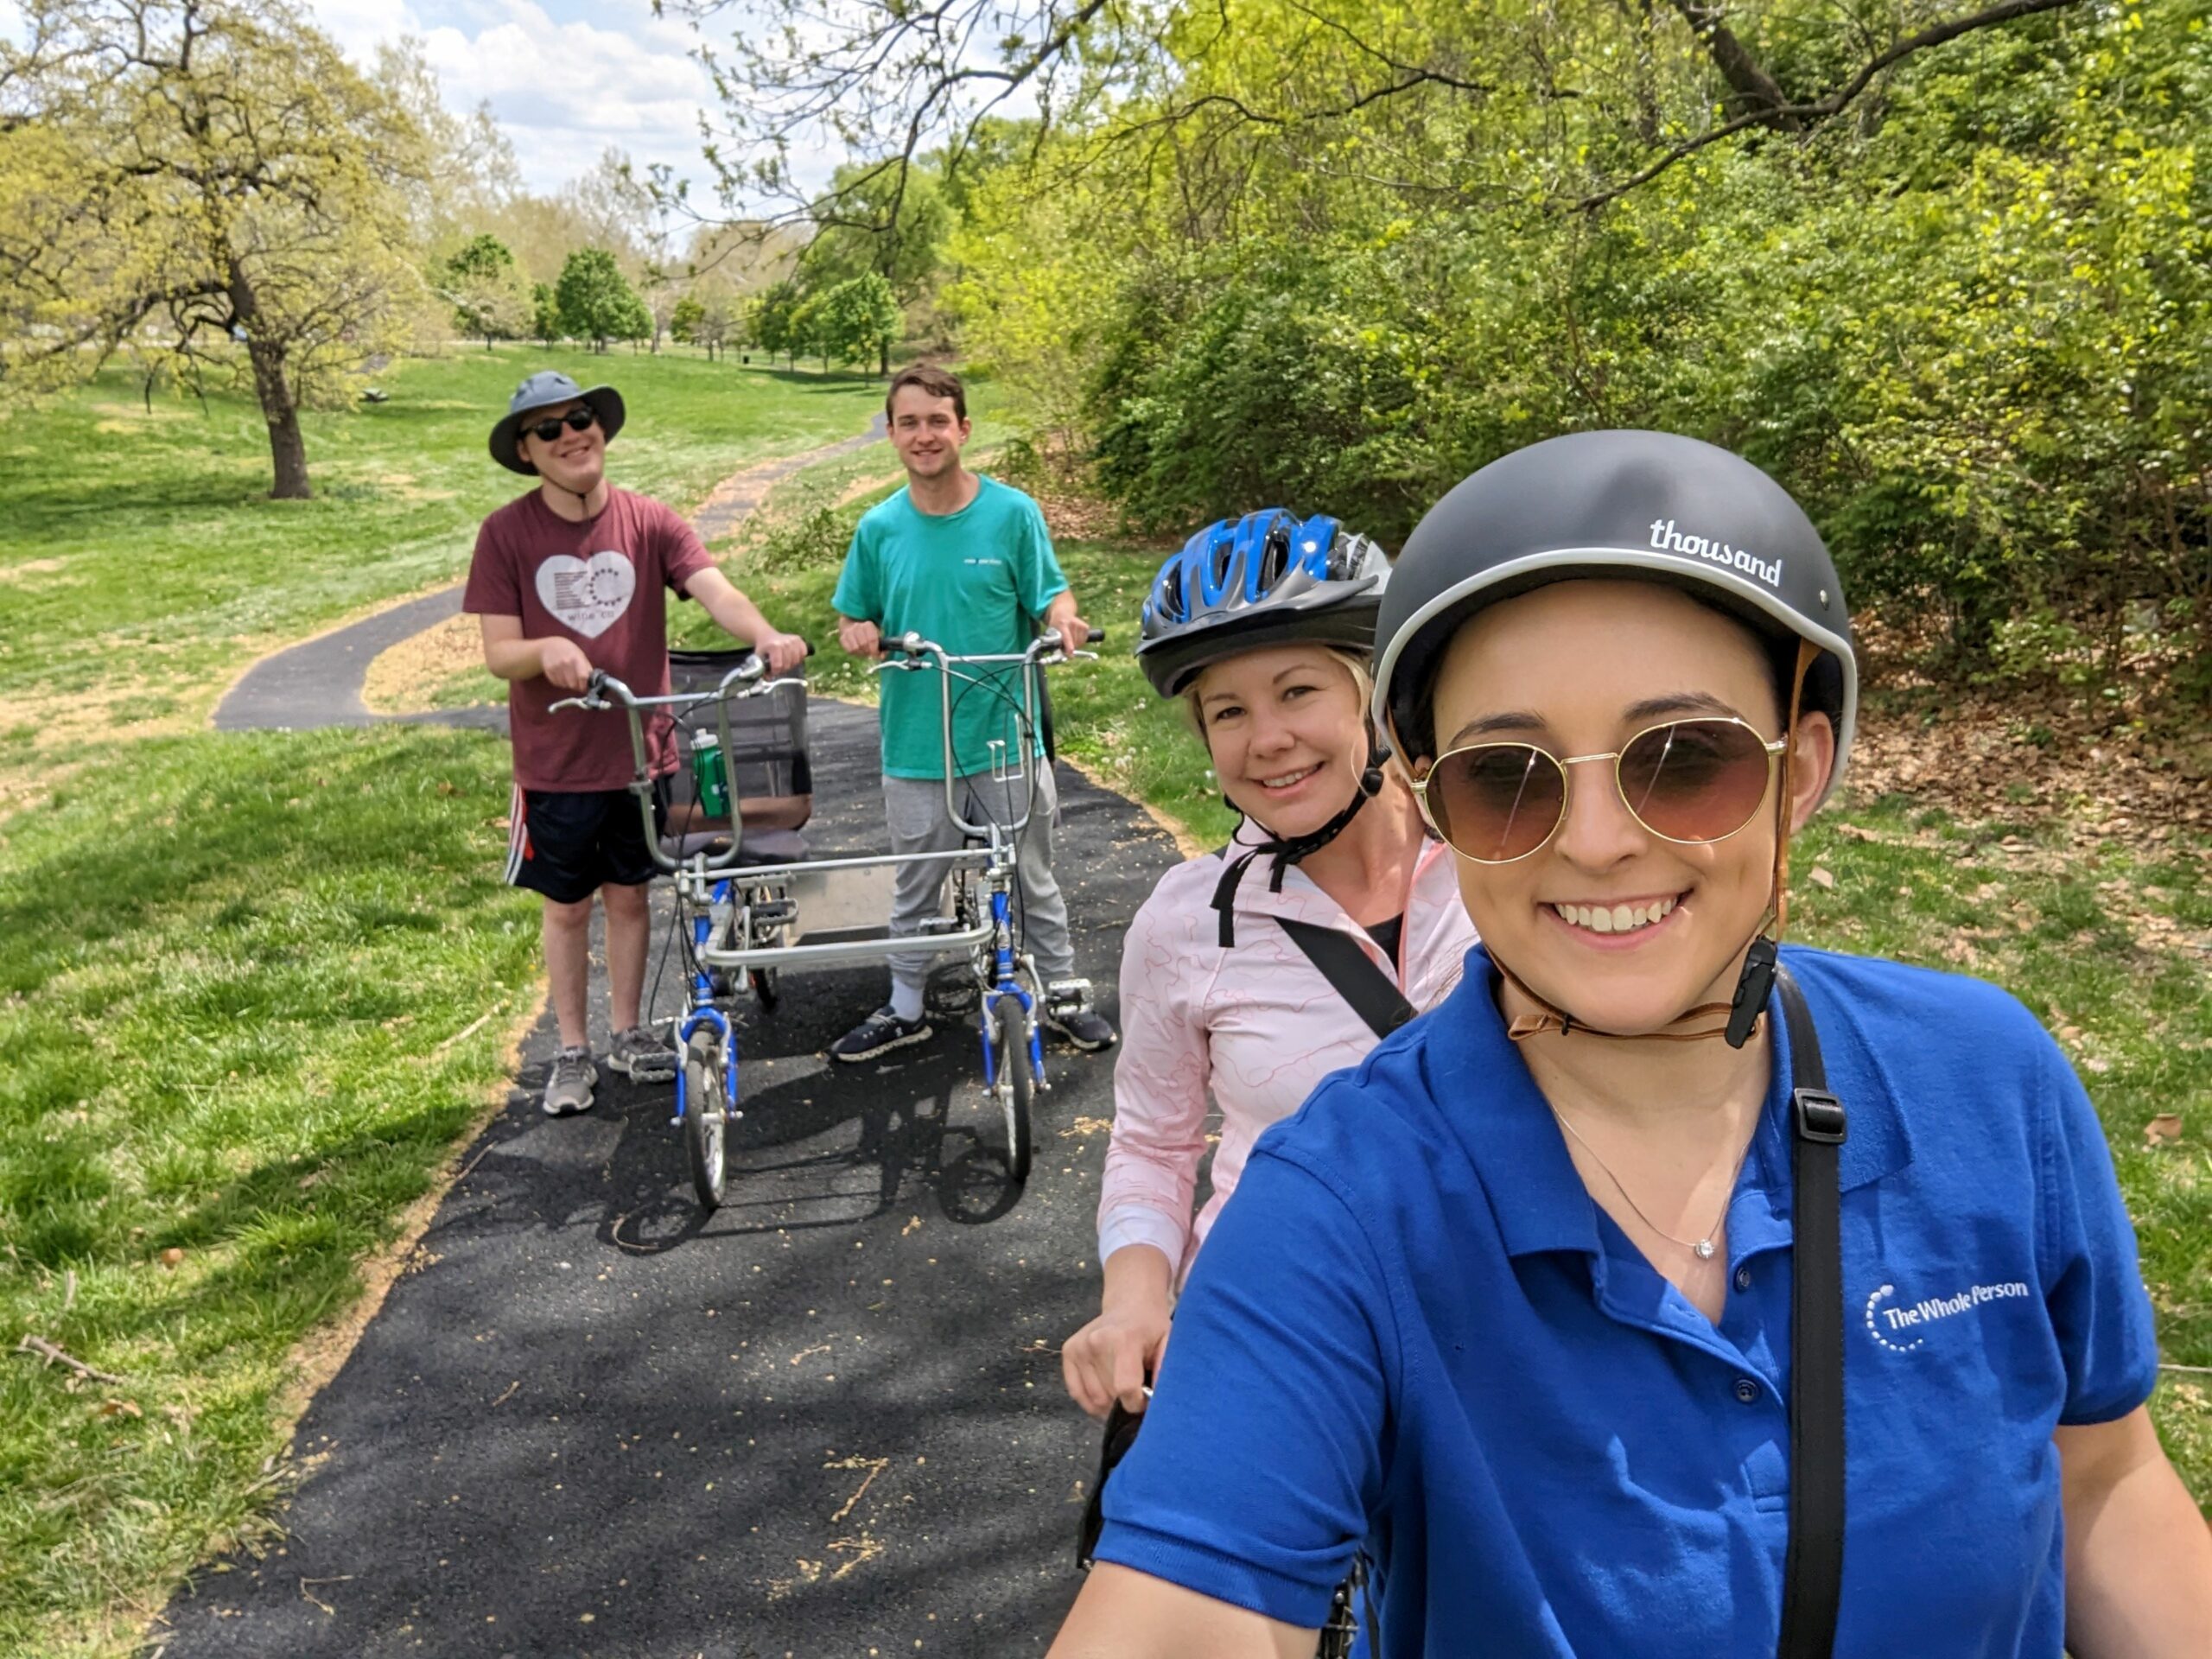 Four people bike riding on an outdoor track